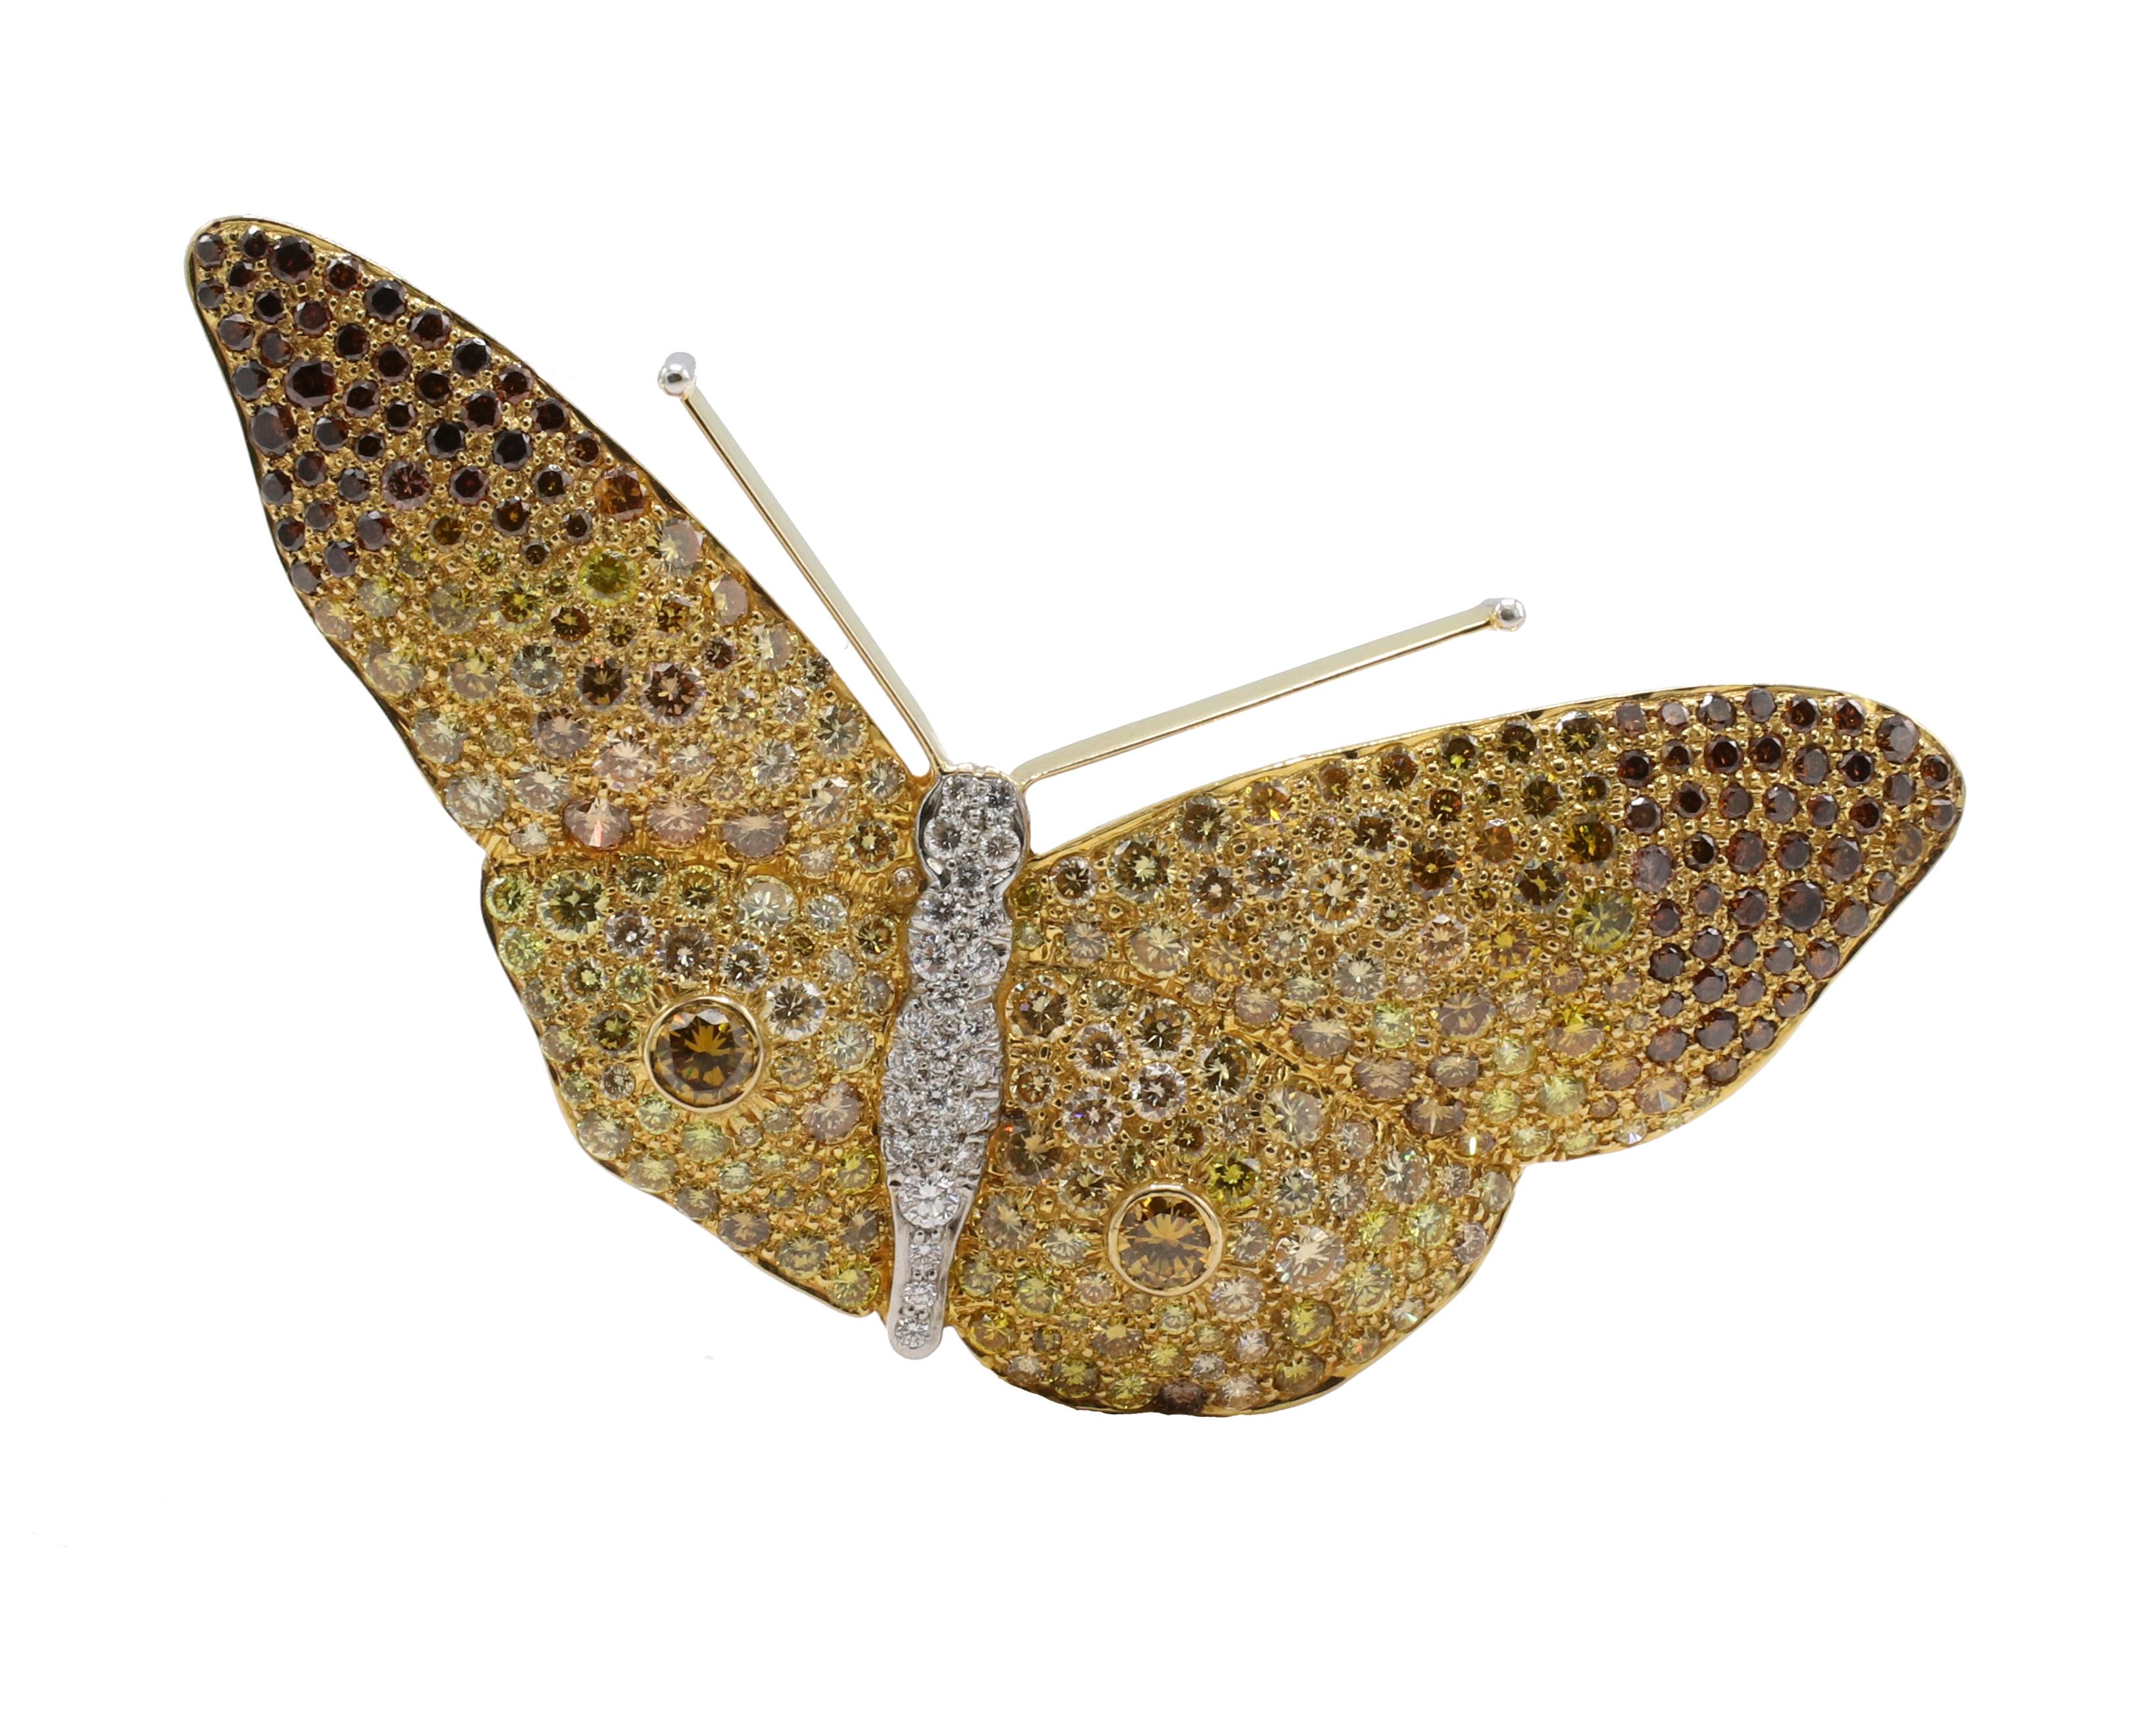 18 Karat Yellow Gold Multi-Colored Natural Diamond Butterfly Brooch Pin 
Metal: 18k yellow gold
Weight: 18.5 grams
Dimensions: 65 x 31 mm 
Diamonds: Approx. 3.00 carats yellow, champaign, brown and white round natural diamonds

